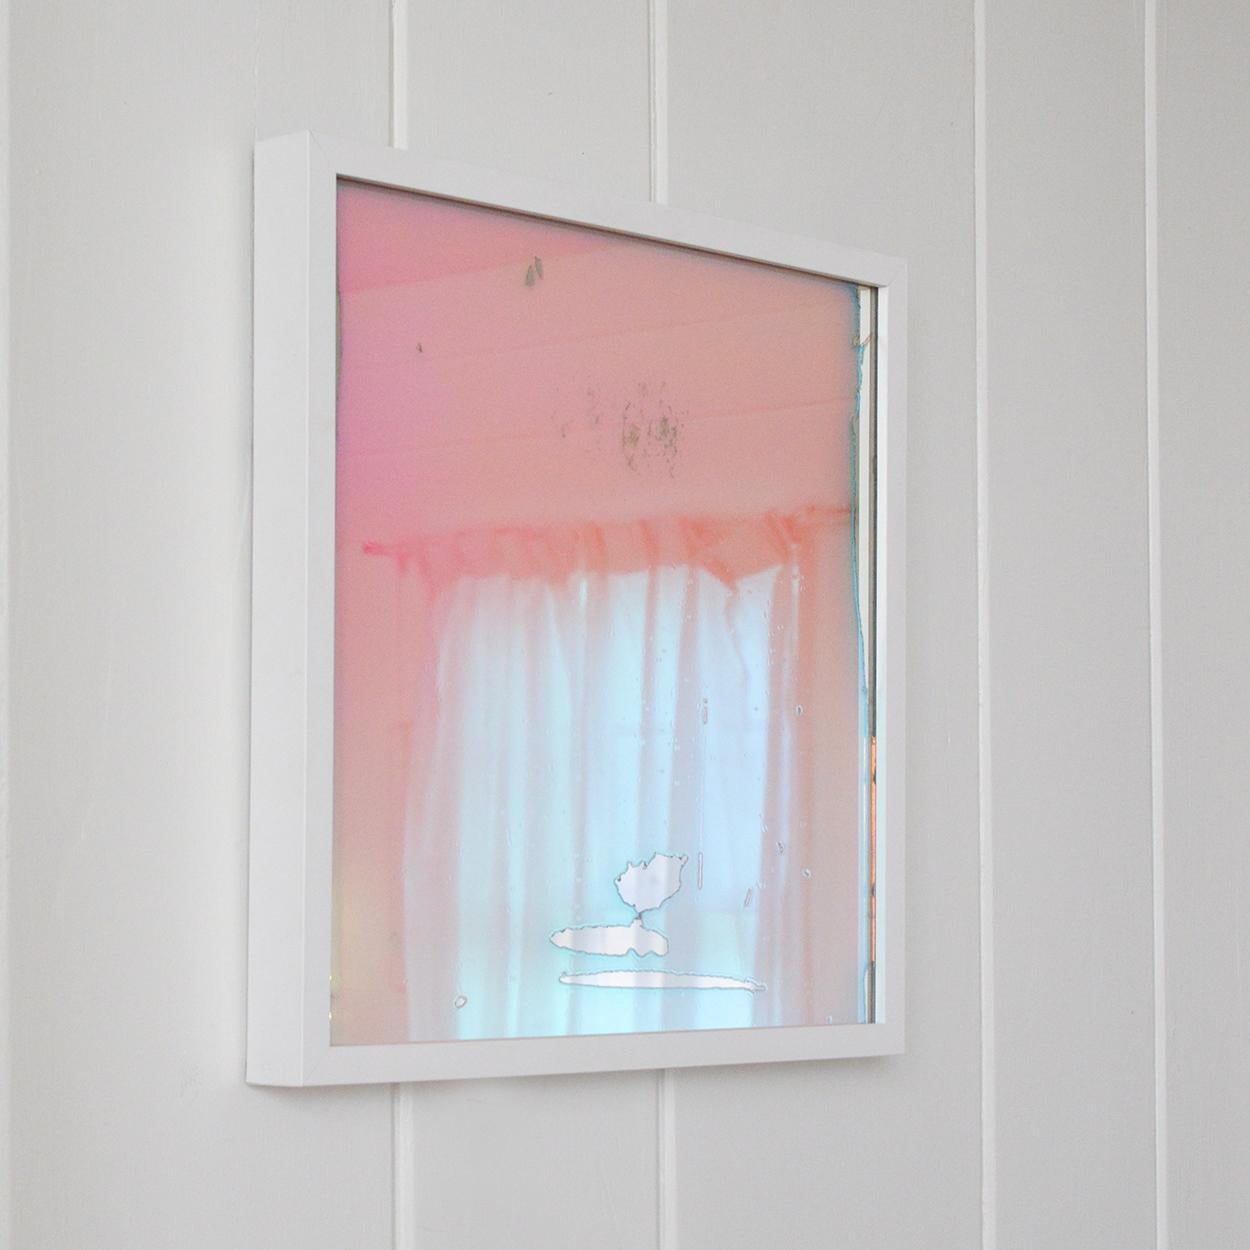 This contemporary piece is made with dichroic film on mirror and is framed in a modern white frame. The artist has applied the film but left small areas without, giving a painterly aesthetic to this mixed-media composition. The area is nearly all